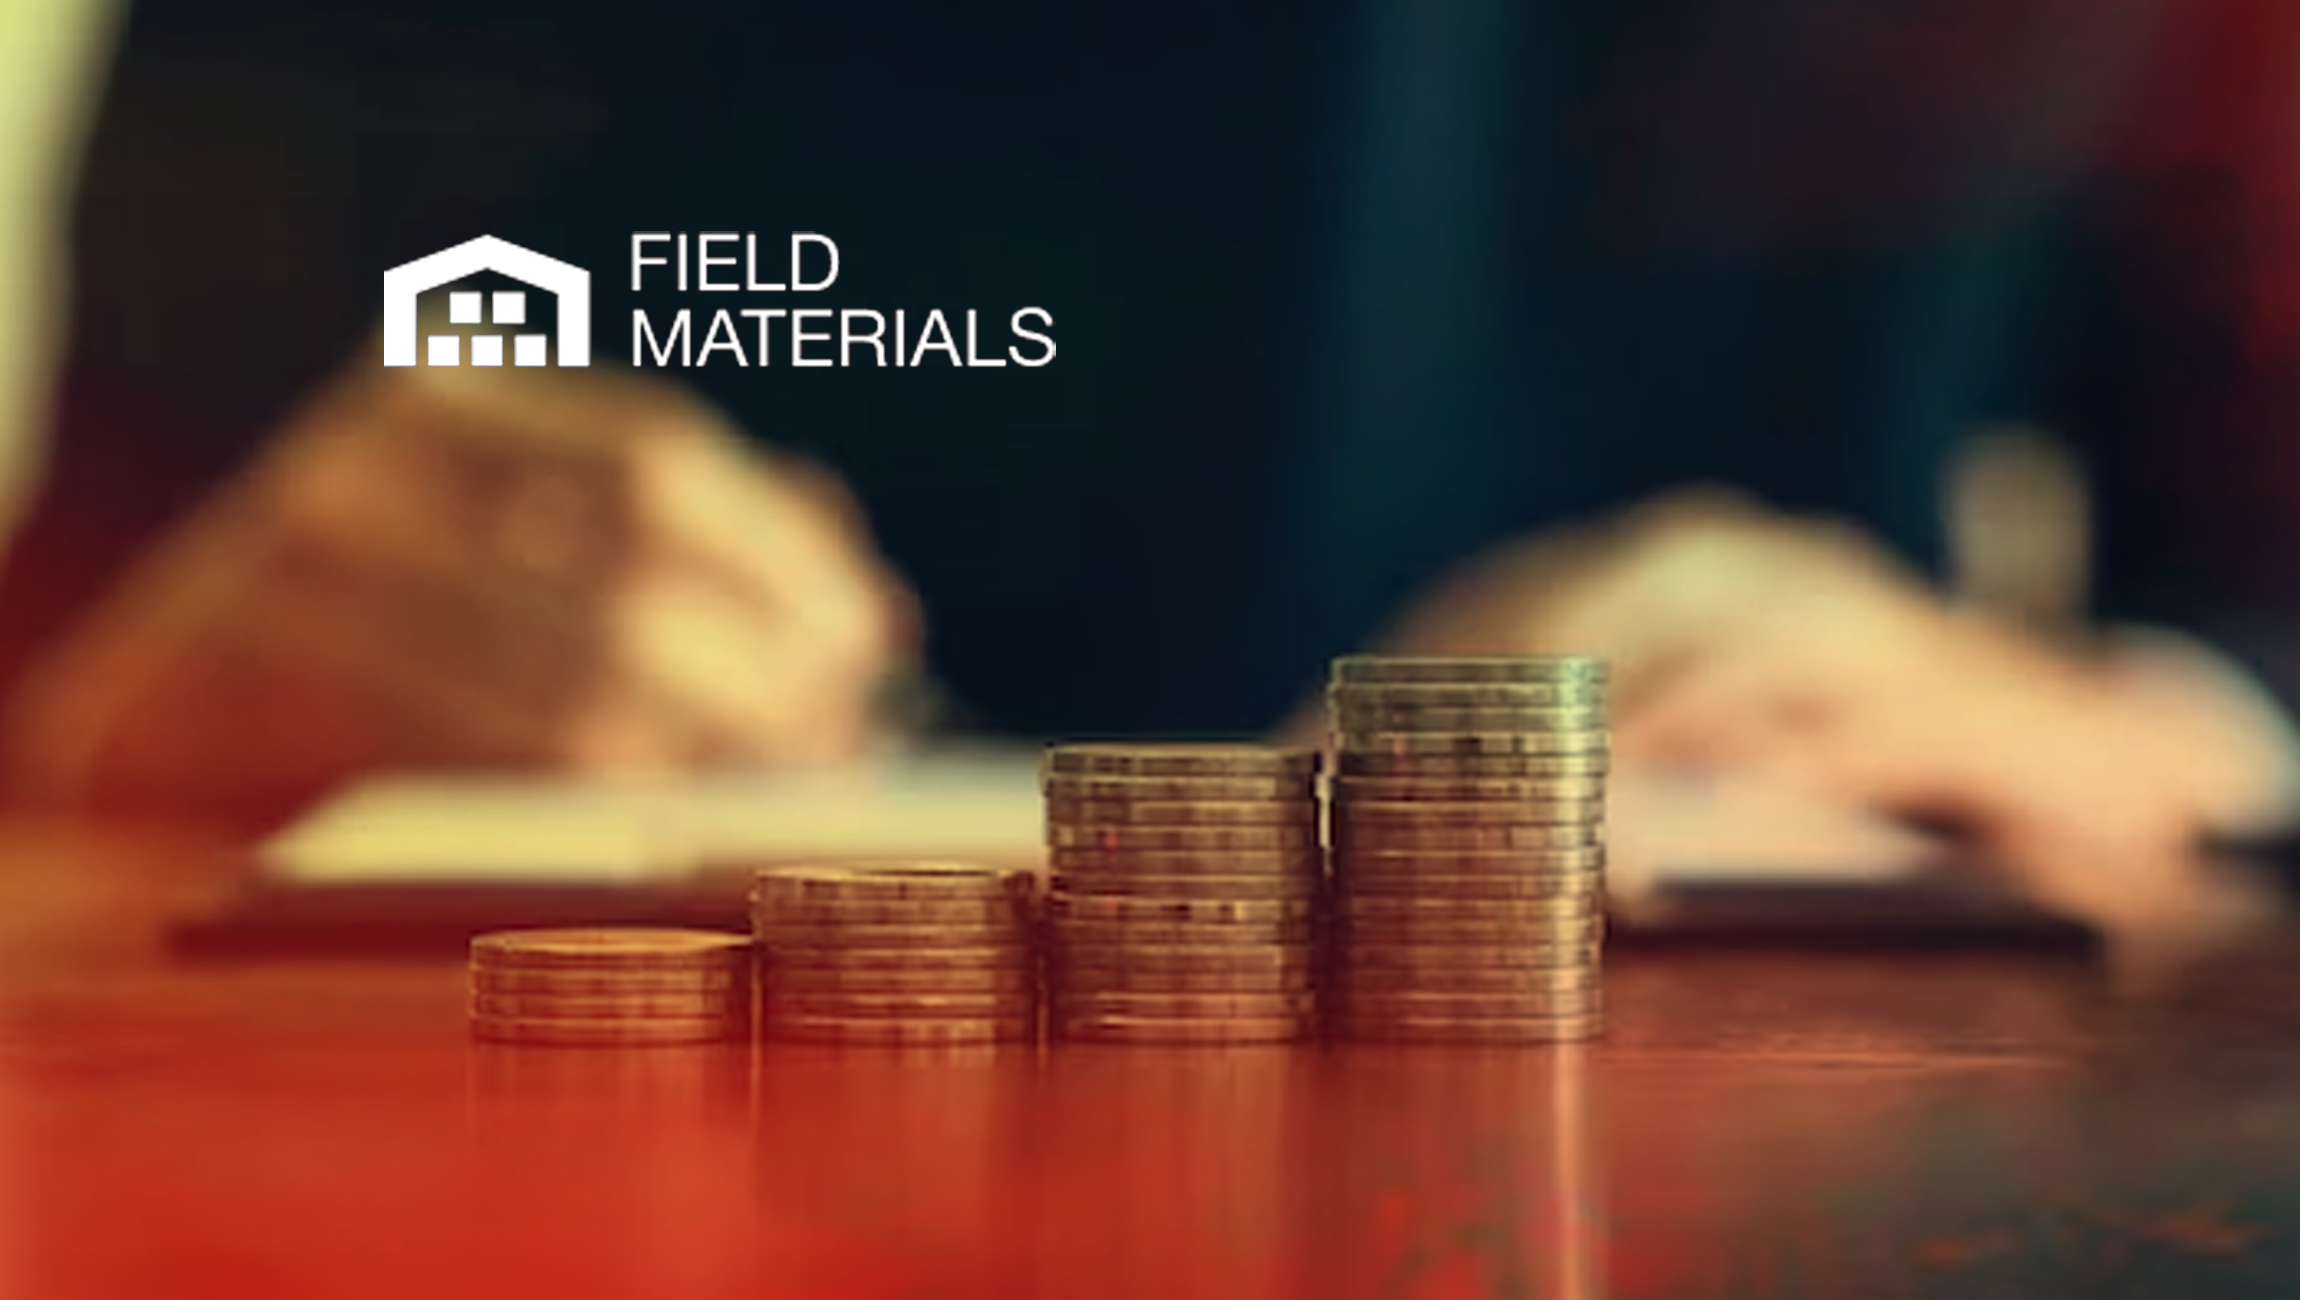 Field Materials Raises $4.65M Seed Funding to Disrupt the Construction Material Purchasing Market